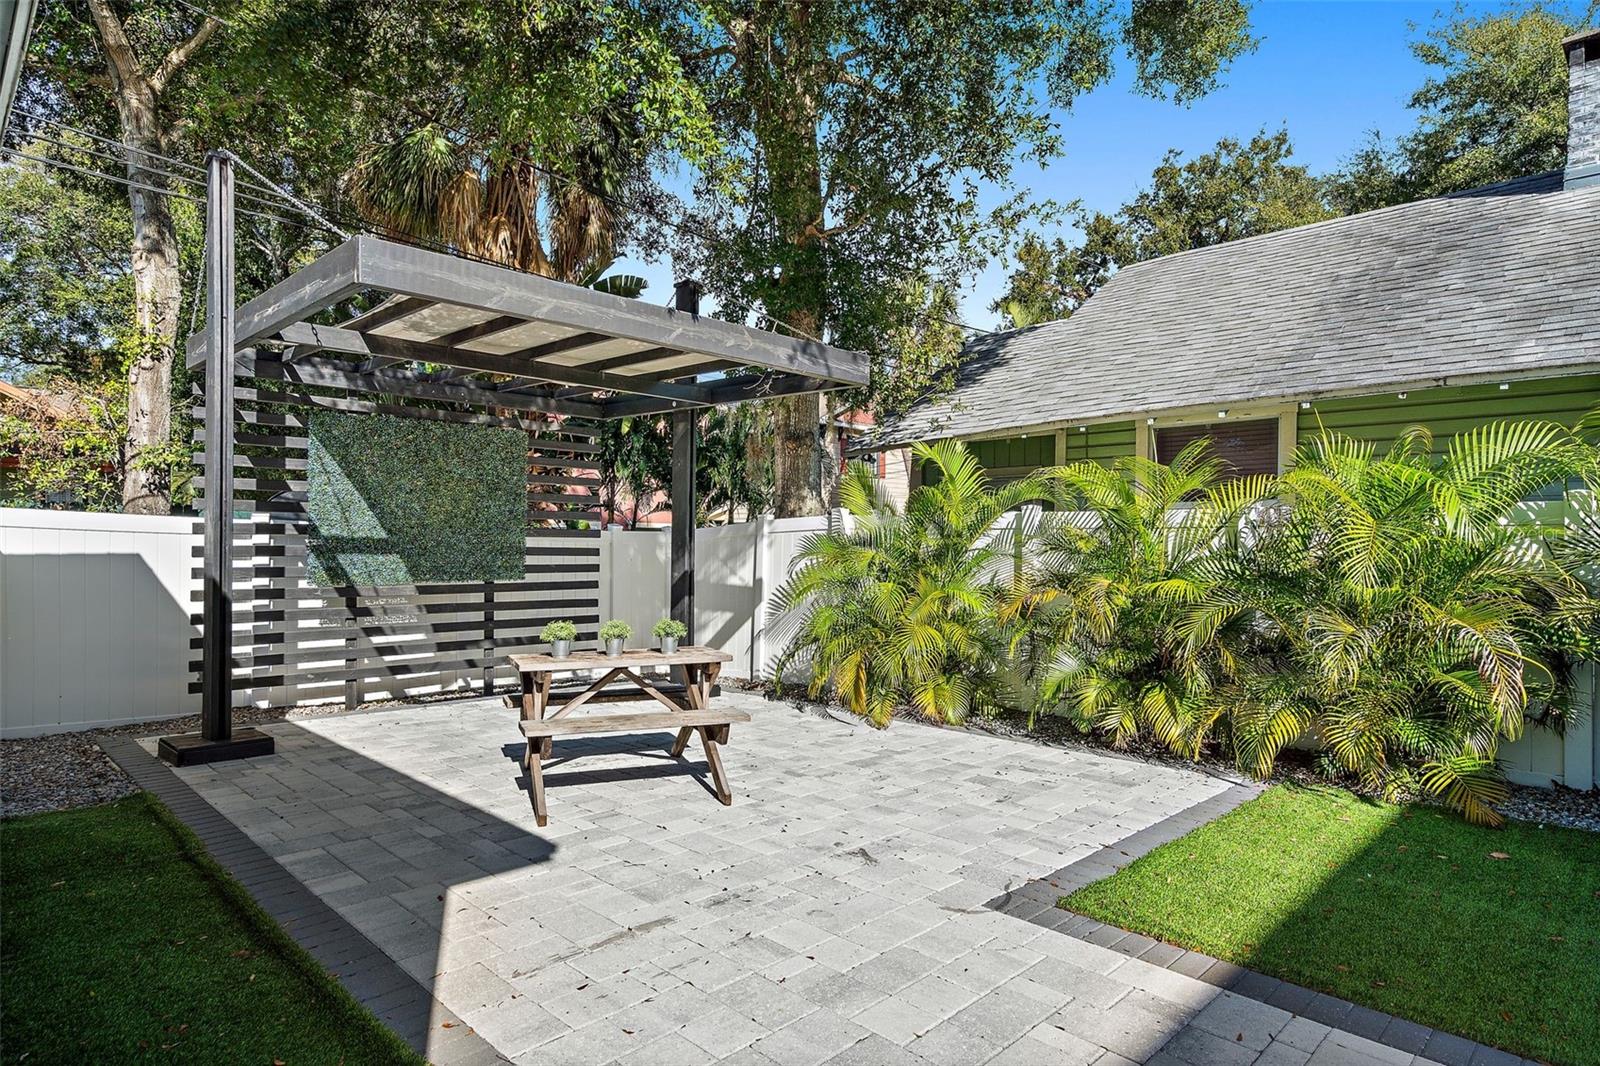 Backyard is fully fenced and has a beautiful modern pergola.